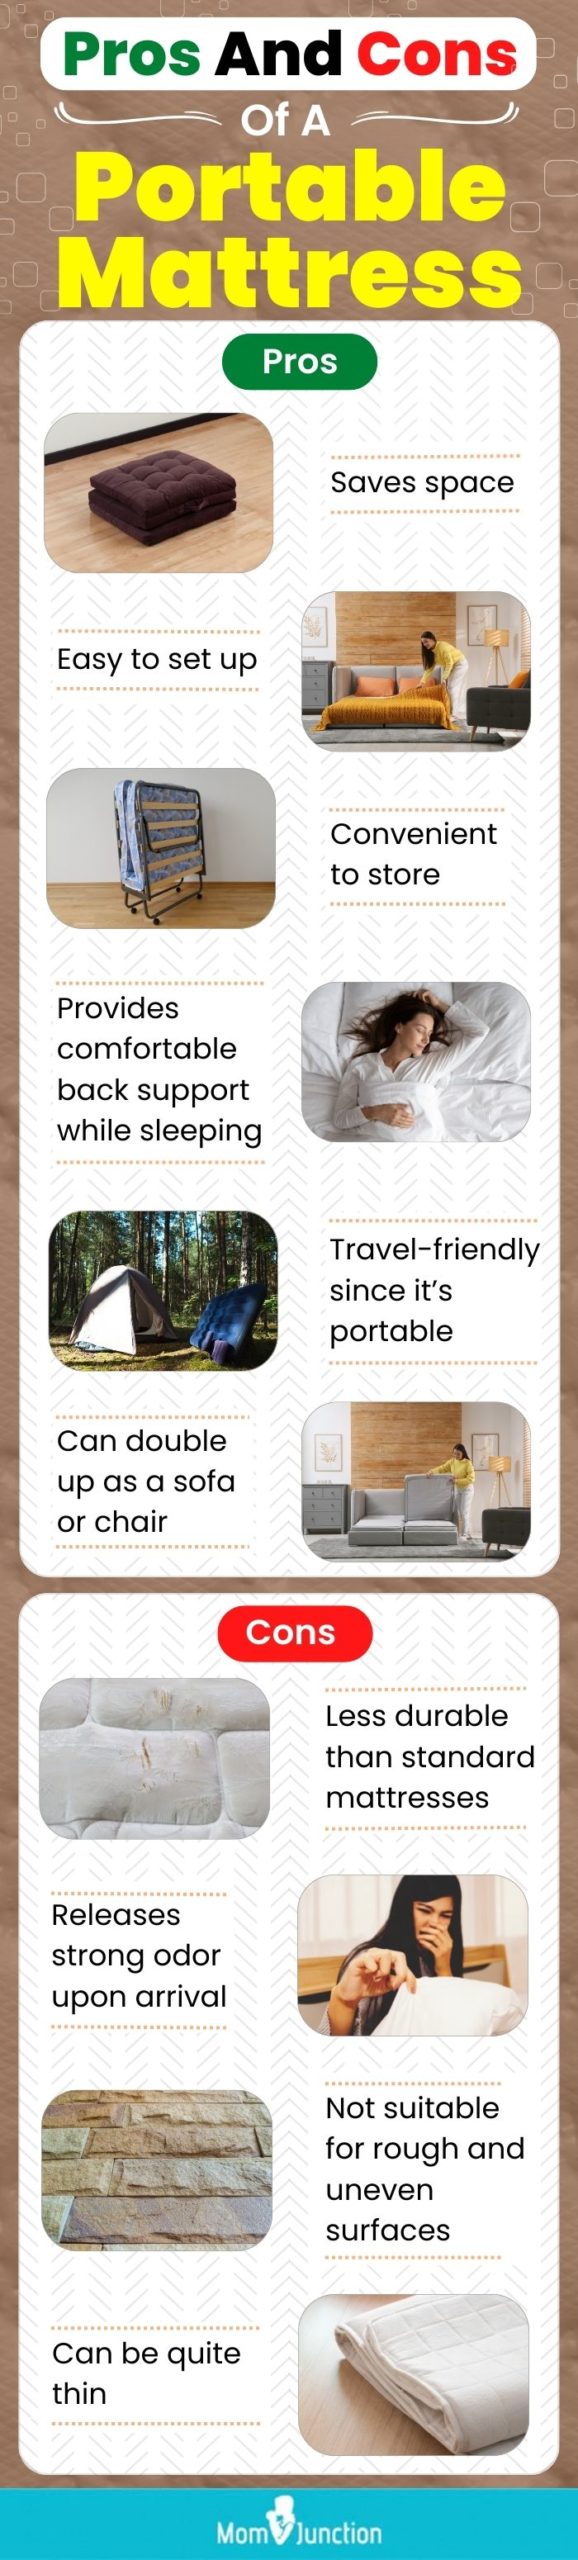 Pros And Cons Of A Portable Mattress